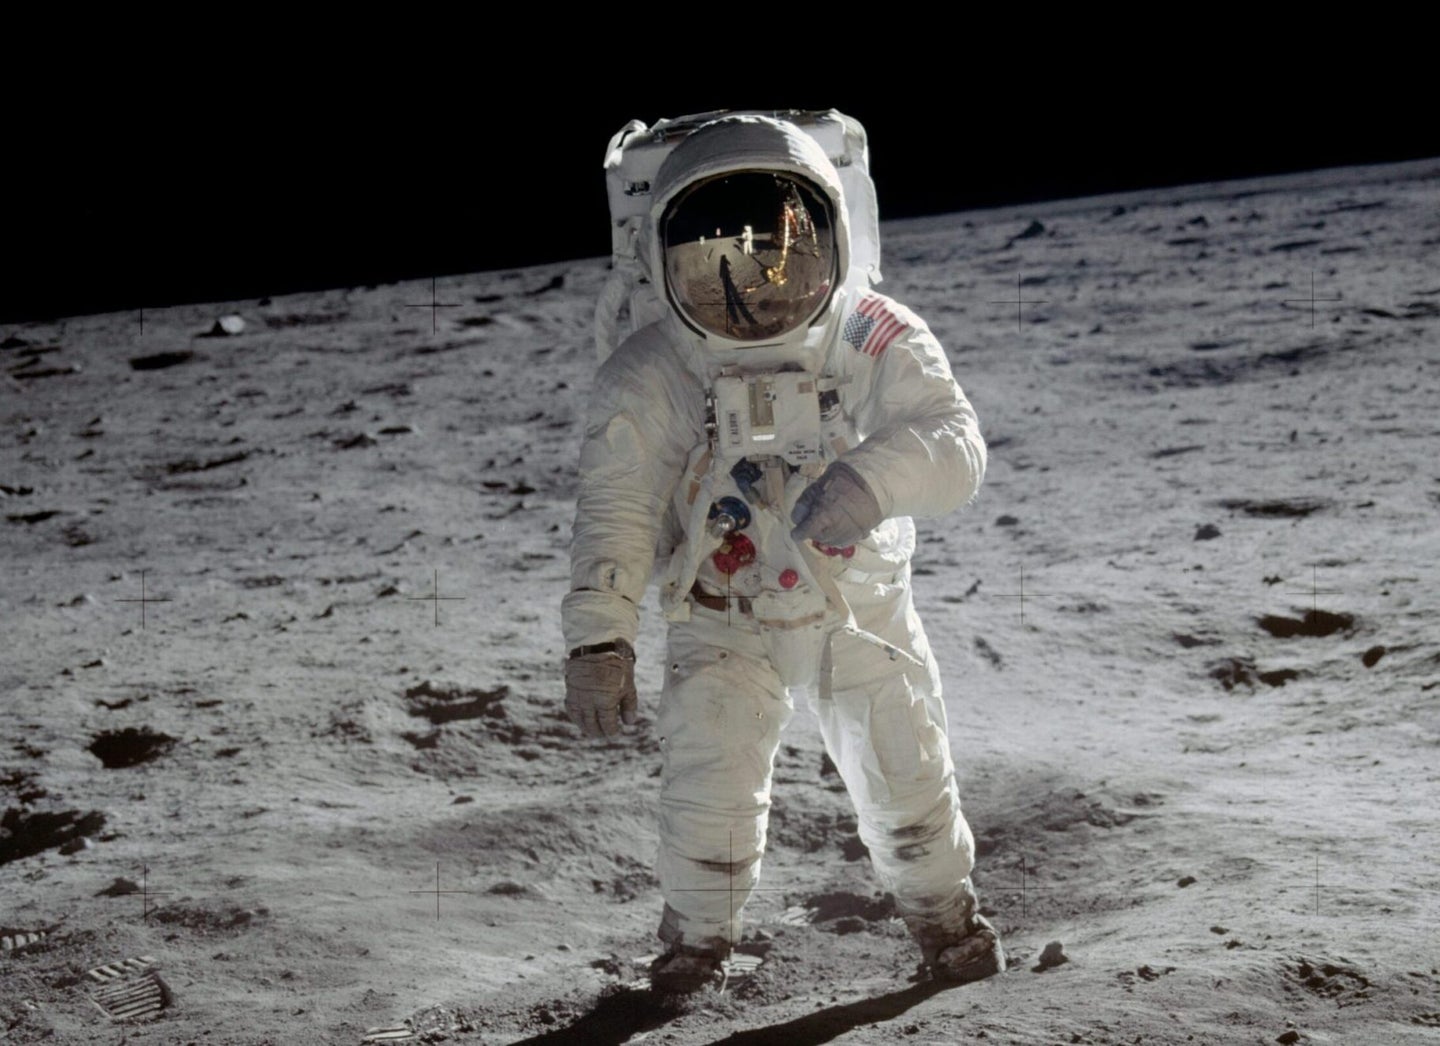 Astronaut Buzz Aldrin photographed on the moon during Apollo 11 by Neil Armstrong